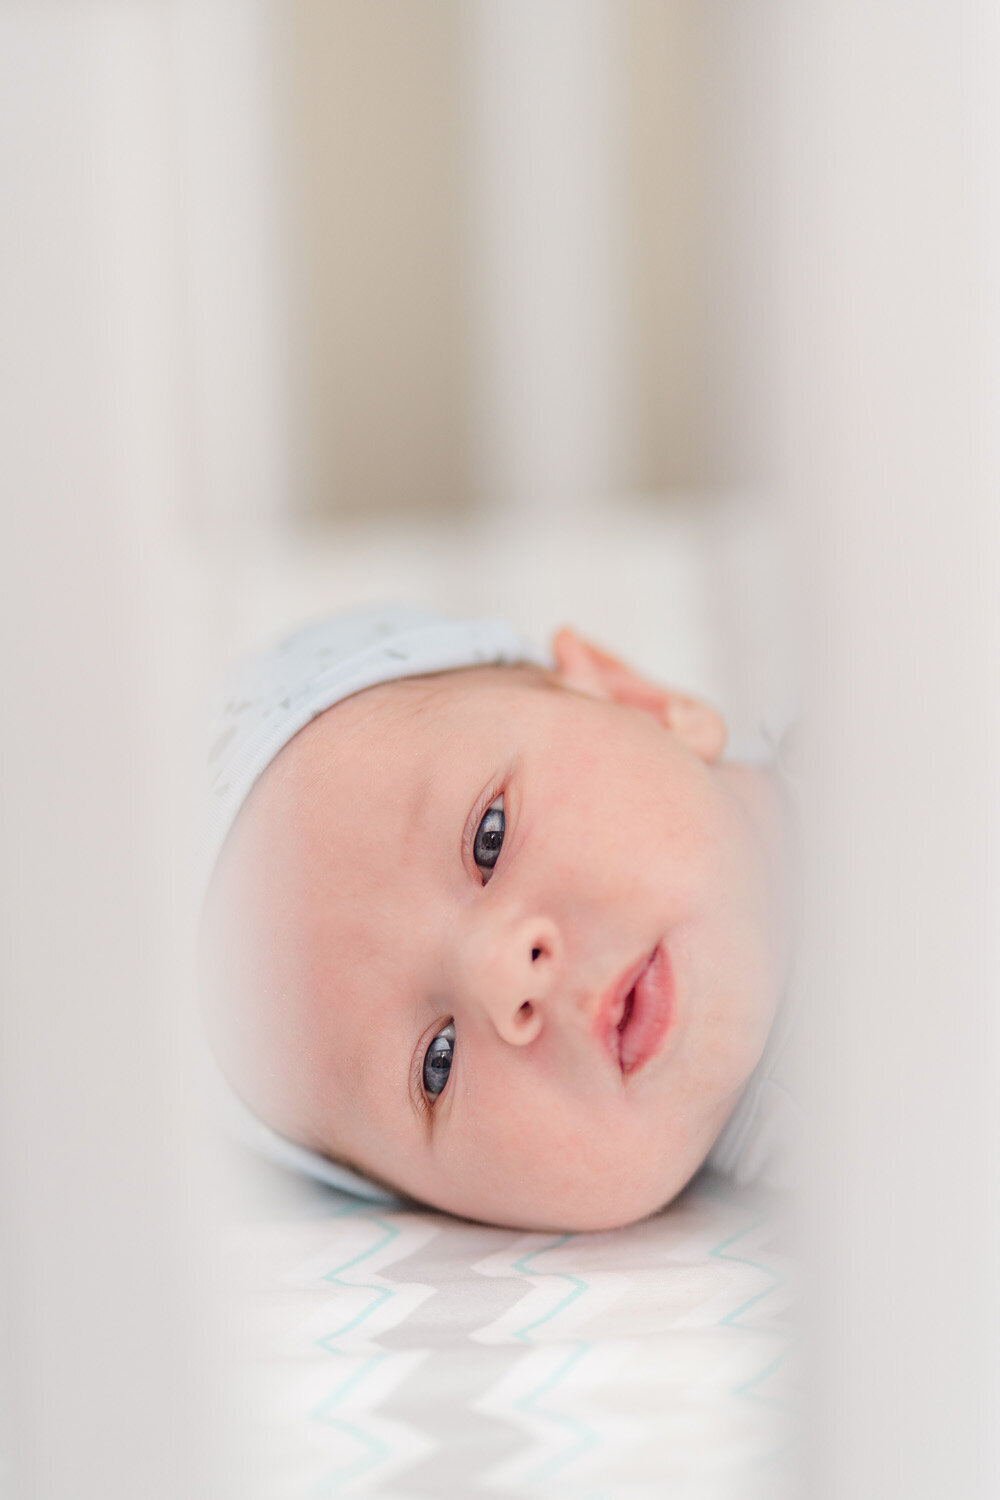 baby boy in his crib taken by a lifestyle newborn photographer in Northern Virginia